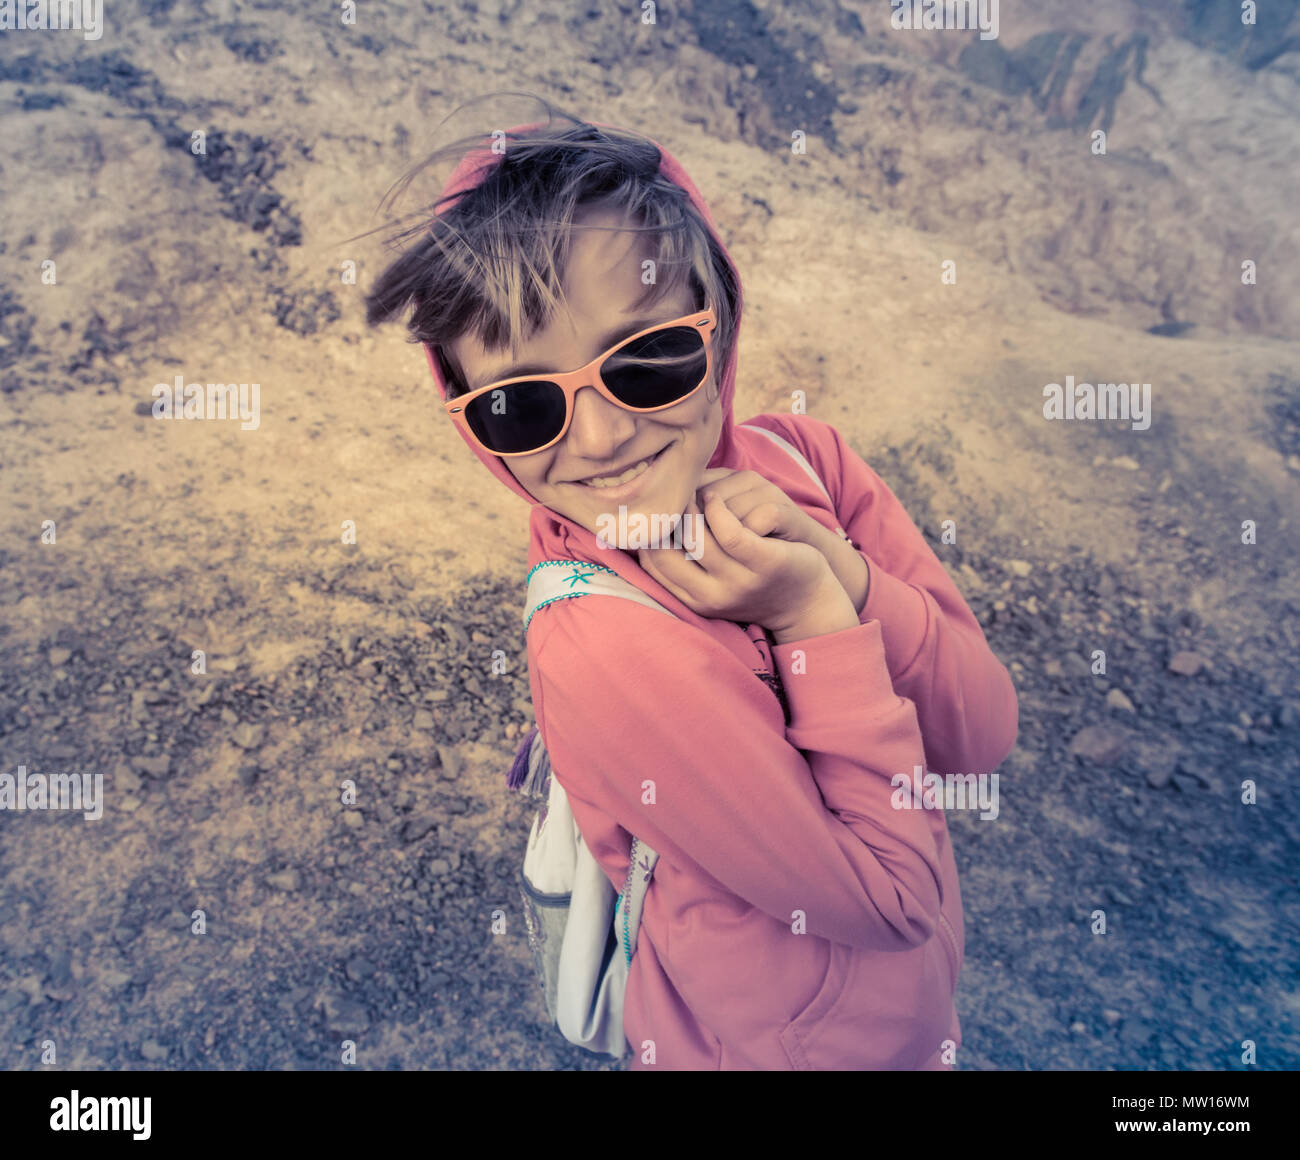 Young girl in sunglasses smiles and laughs at camera Stock Photo